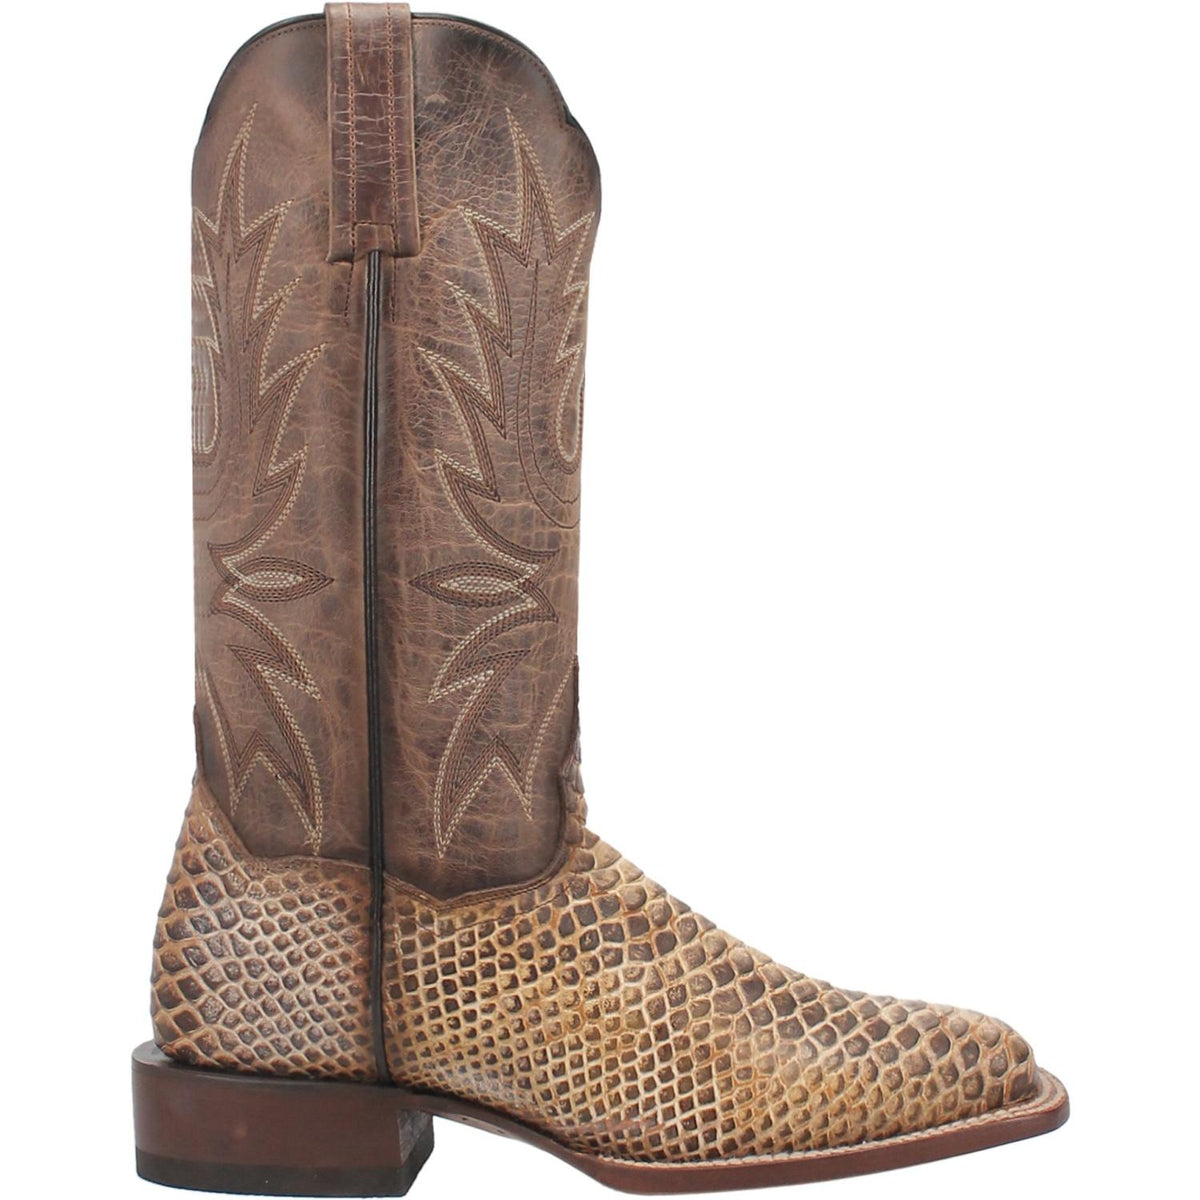 DEE FAUX PYTHONLEATHER BOOT Cover